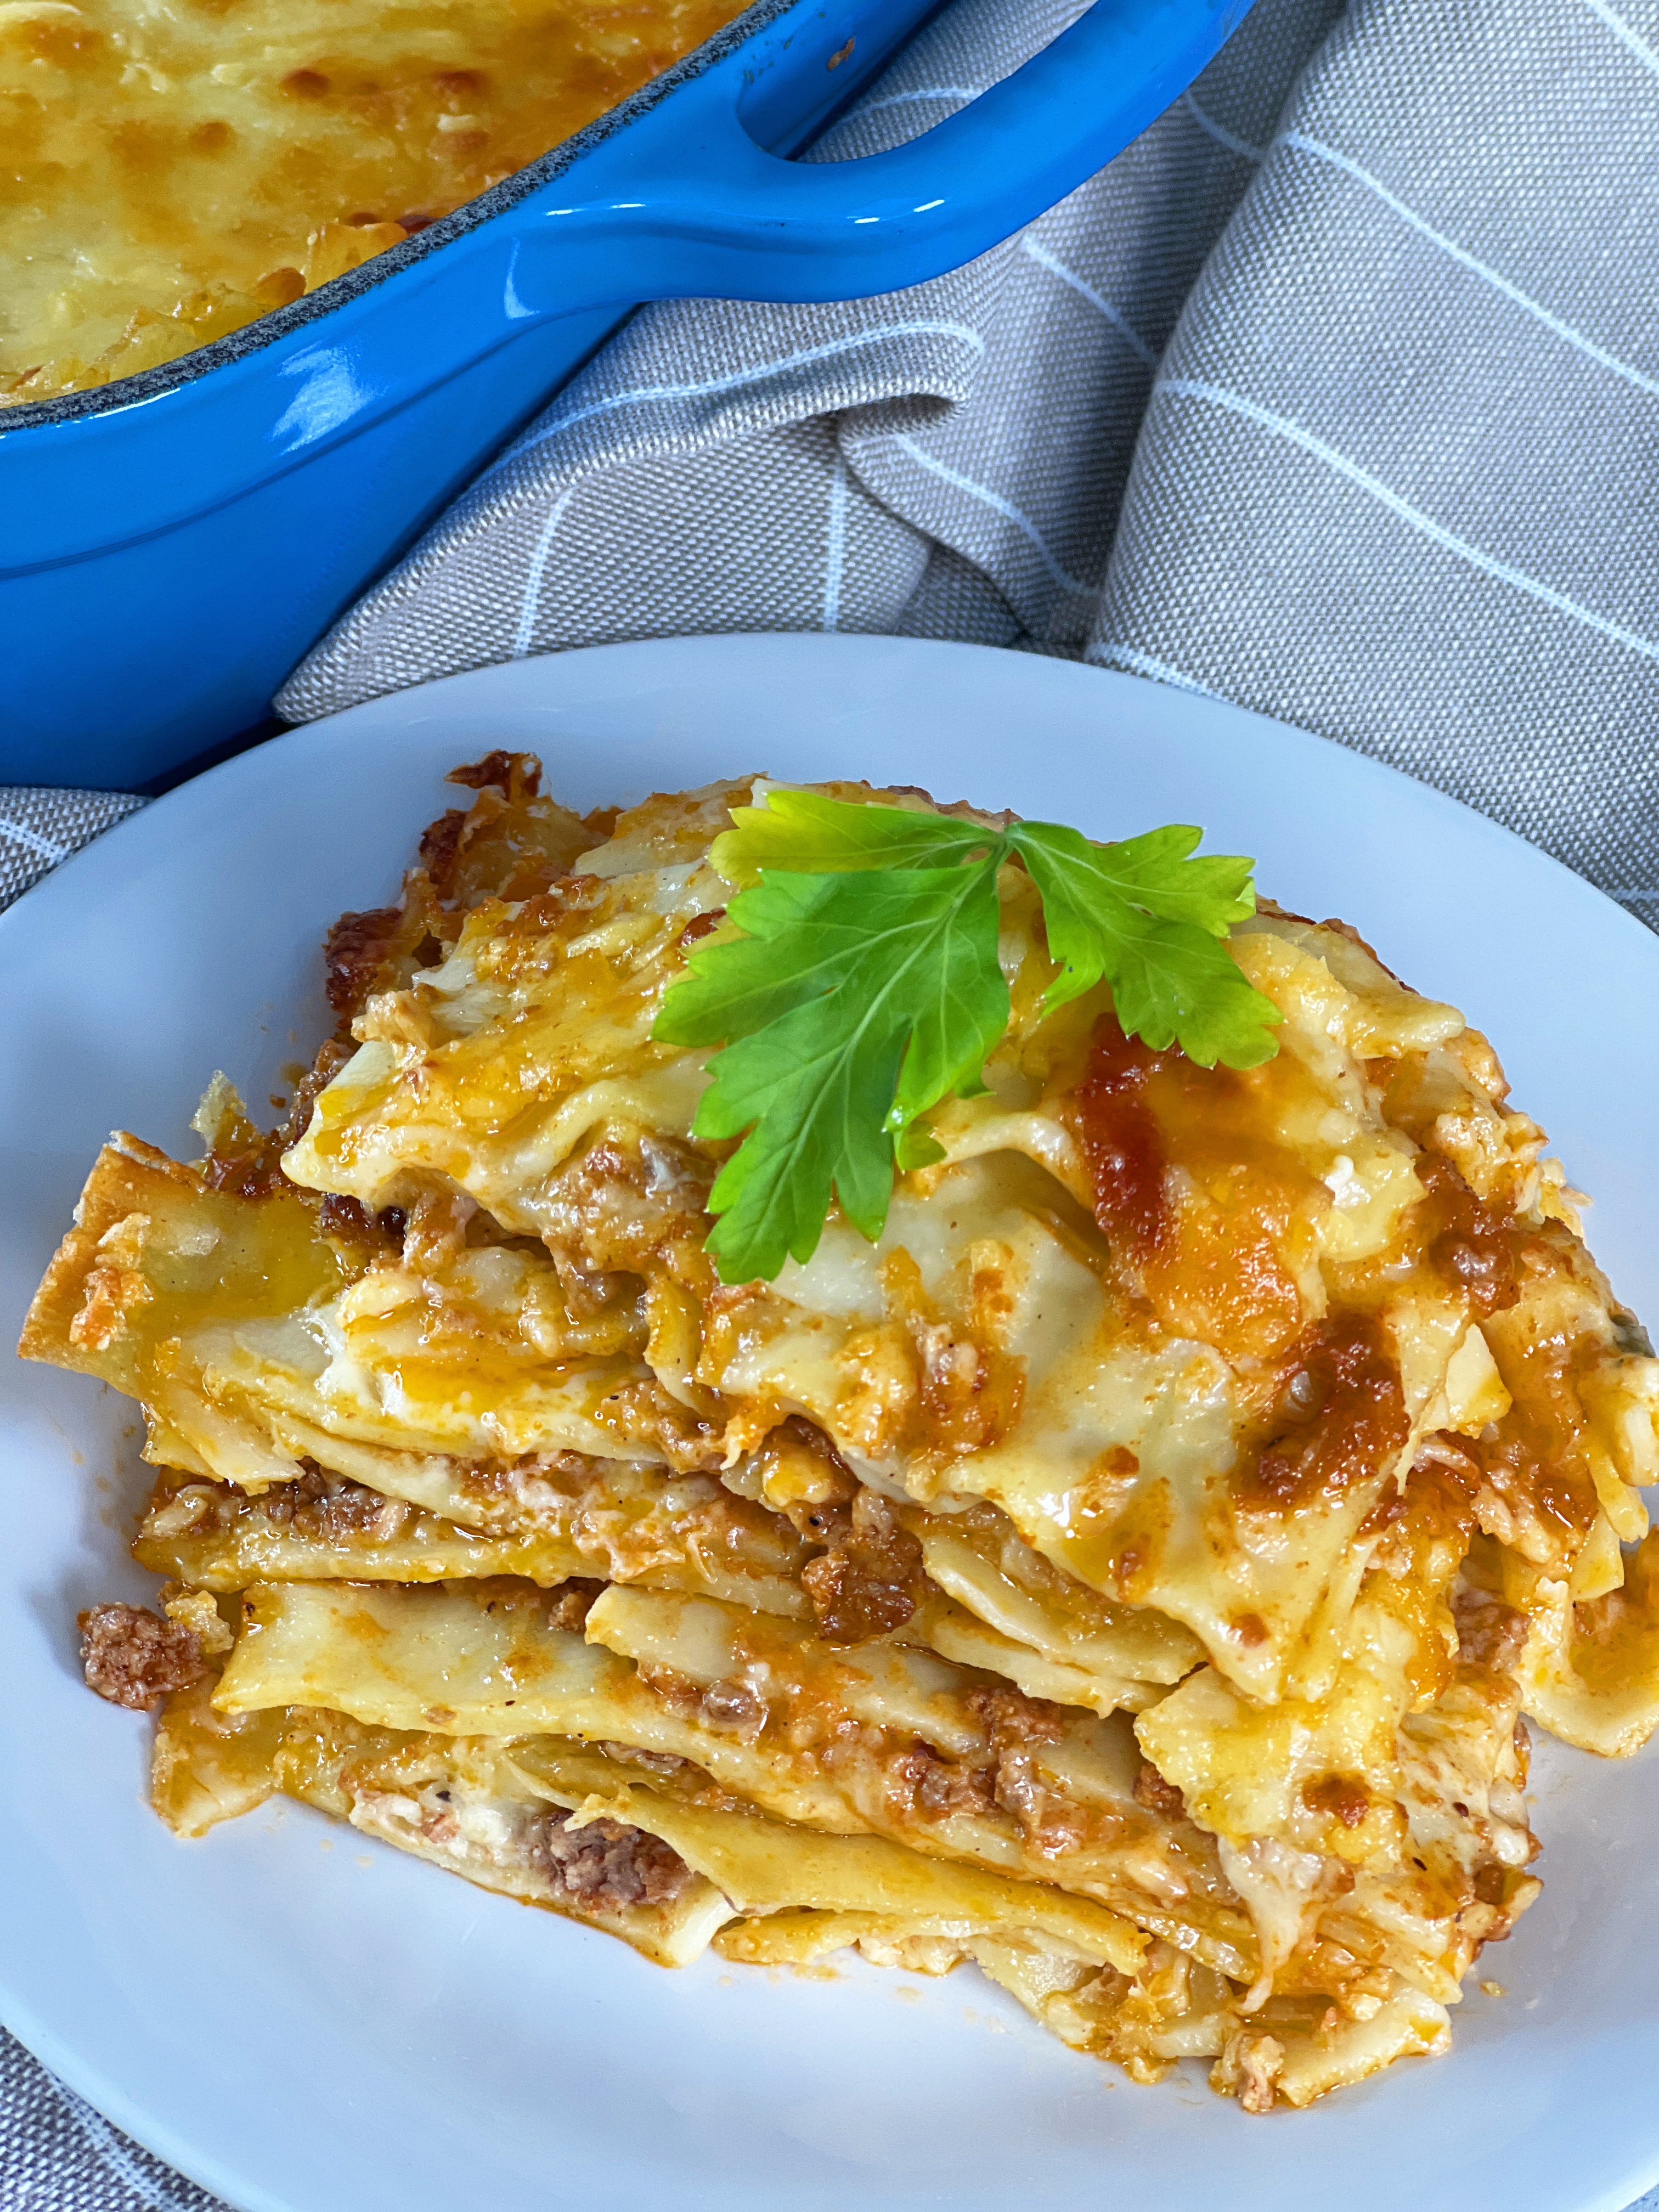 The Best Homemade Lasagna Recipe - That Nurse Can Cook